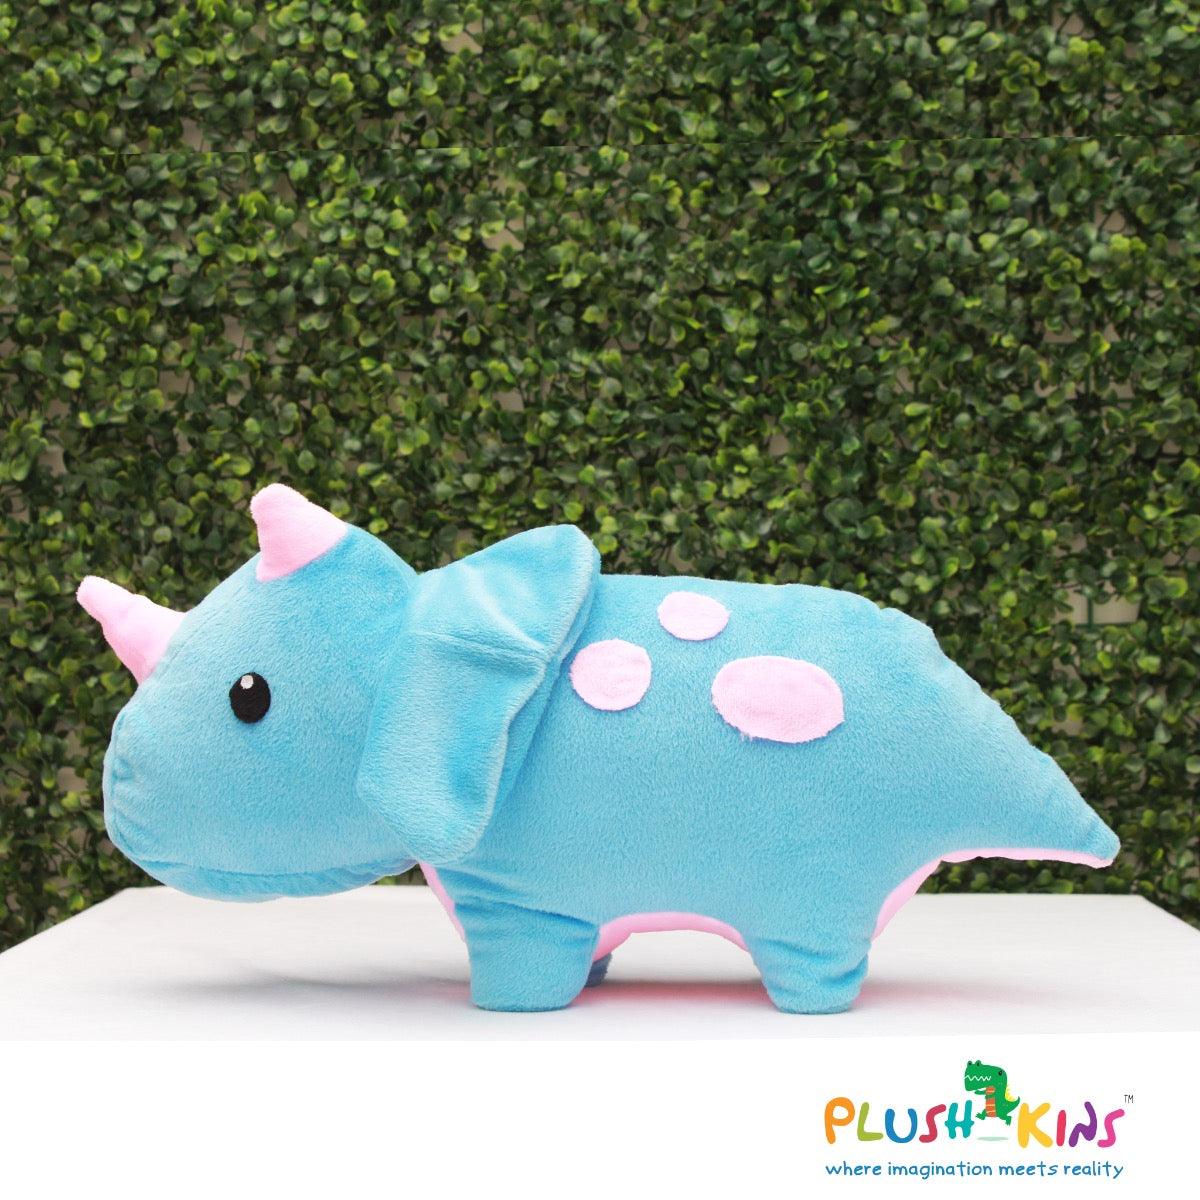 Plushkins Triceratops Dino, Premium Blue & Pink Soft Toy for Kids, Aged 1-10 years, Extra Soft Stuffed Toy with Plyfibre Stuffing